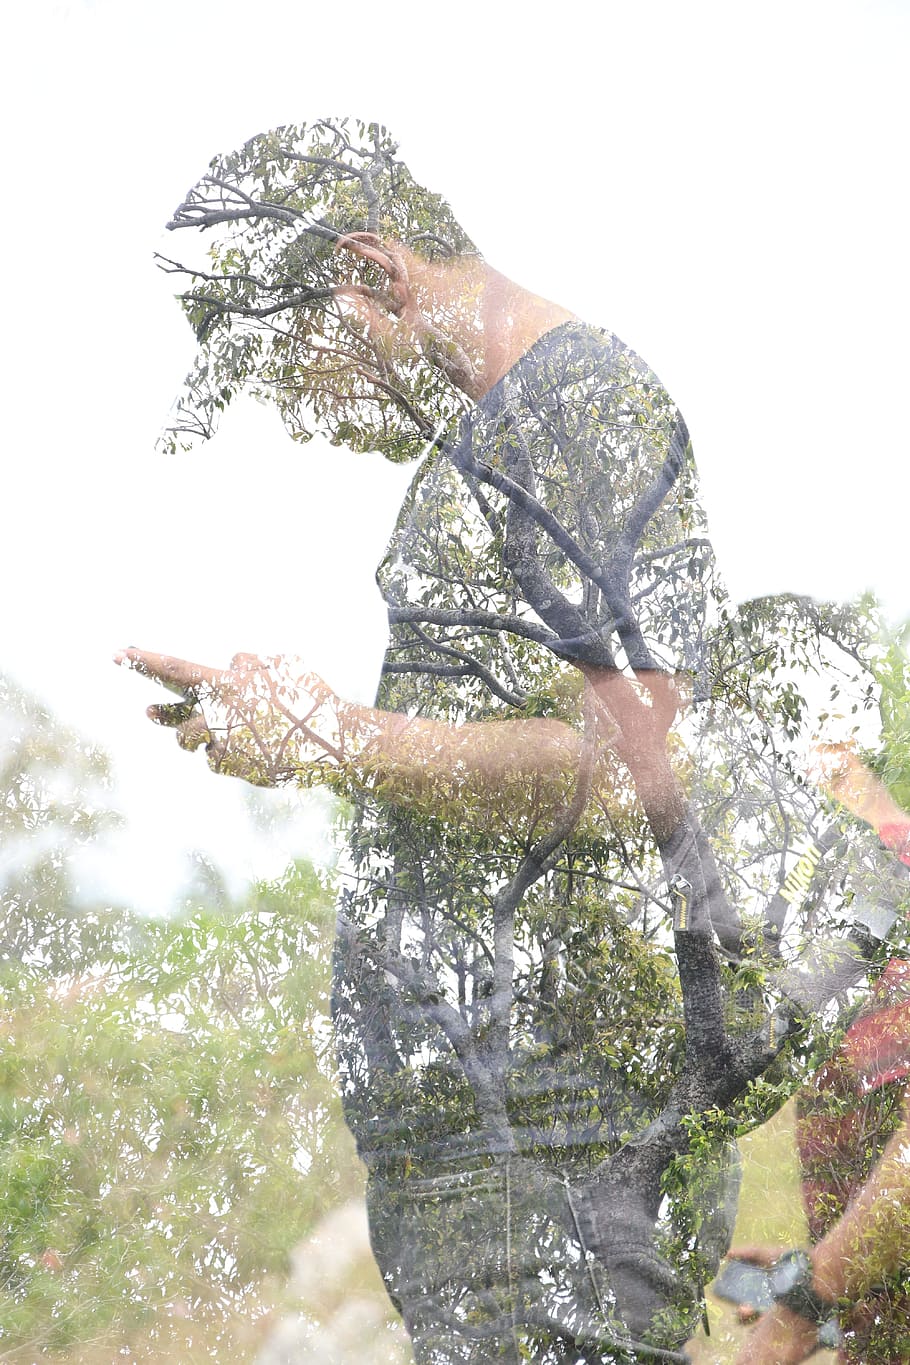 double exposure, nature, people, exposure, double, person, natural, environment, creative, multiple